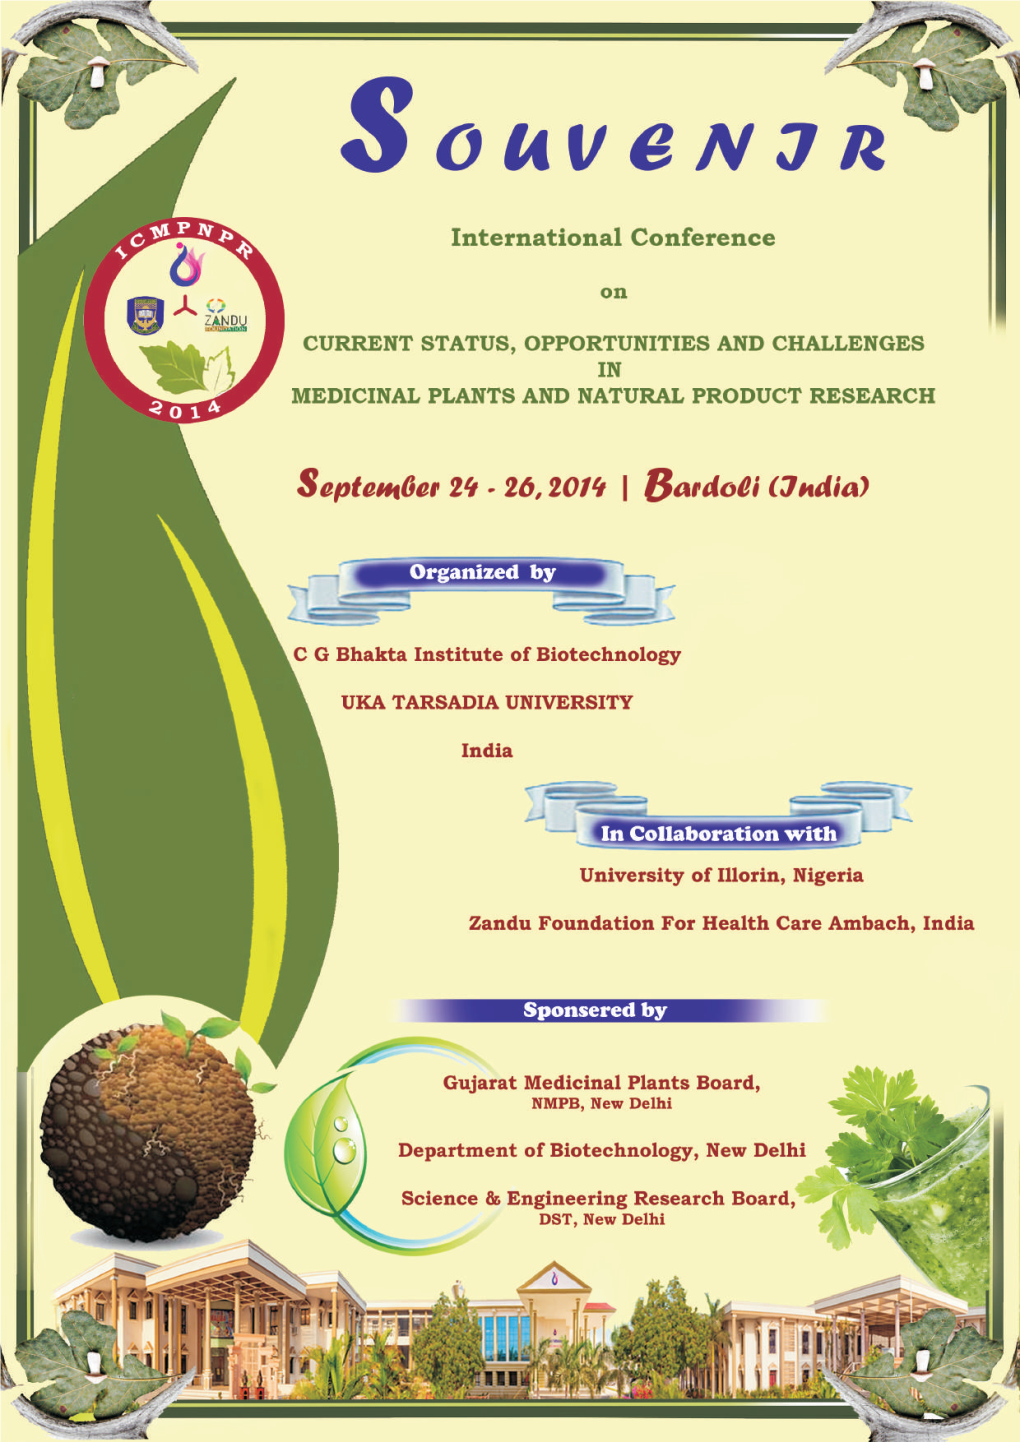 Current Status, Opportunities and Challenges in Medicinal Plants and Natural Product Research”